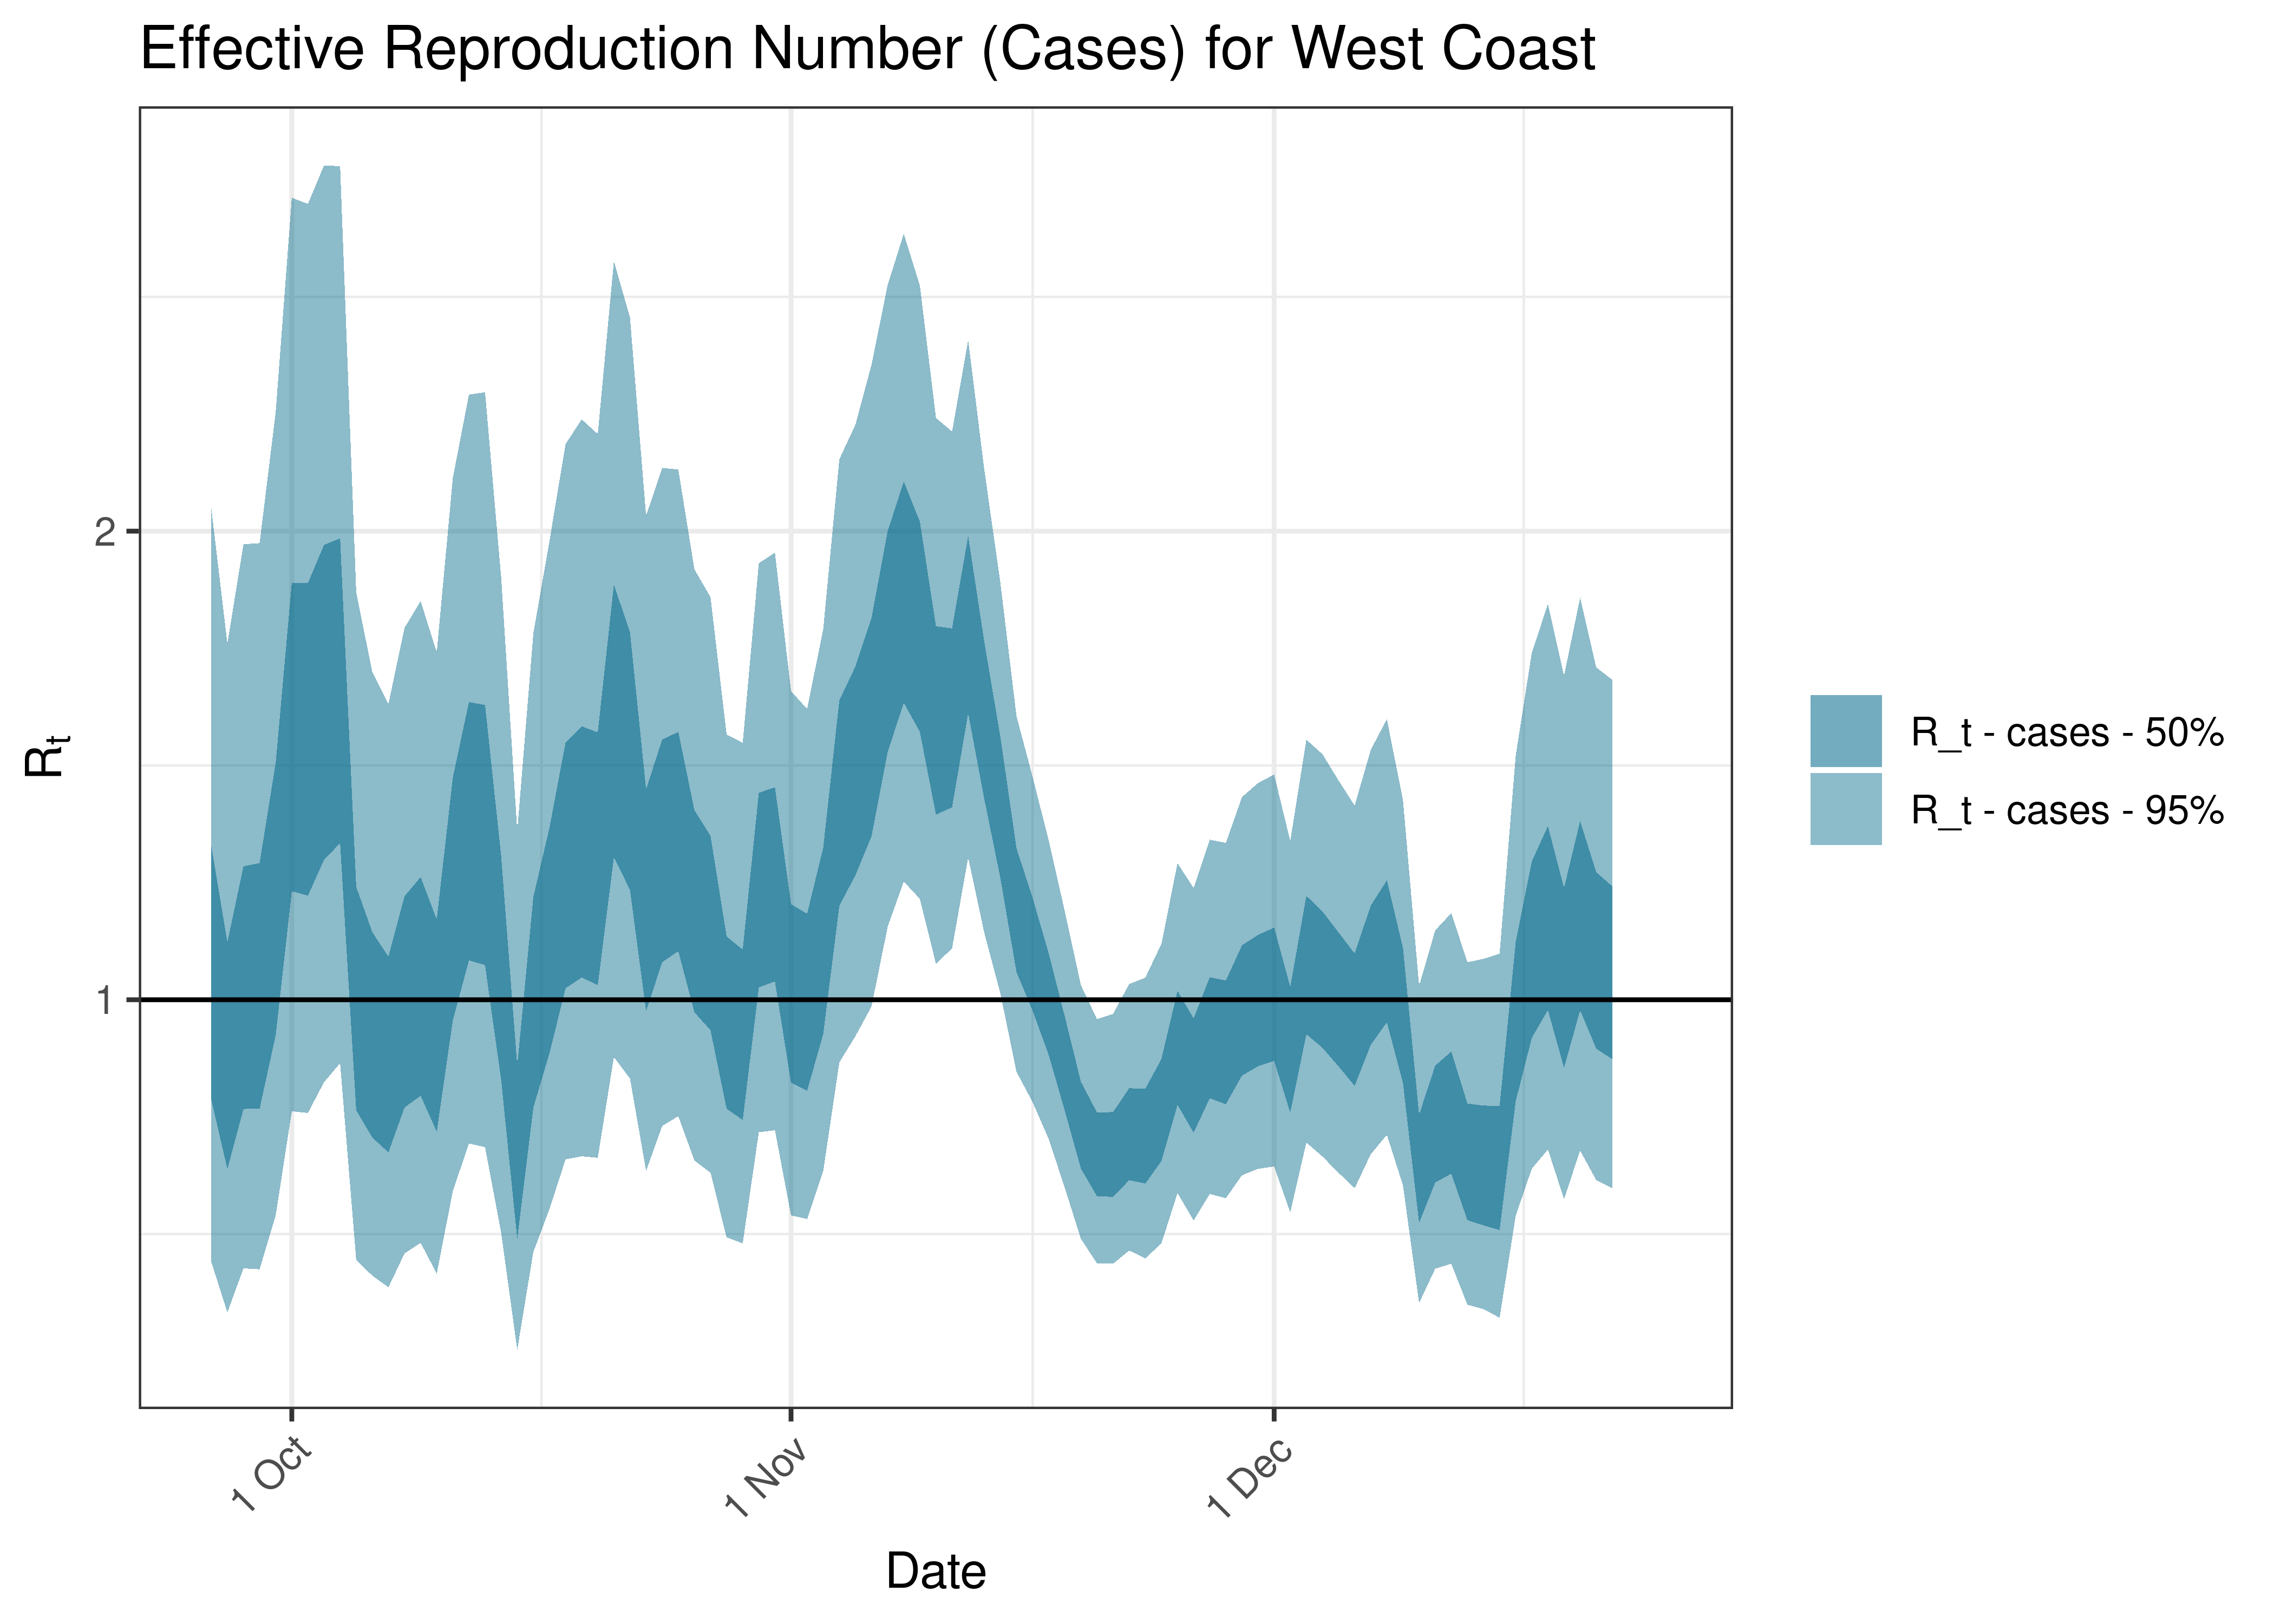 Estimated Effective Reproduction Number Based on Cases for West Coast over last 90 days